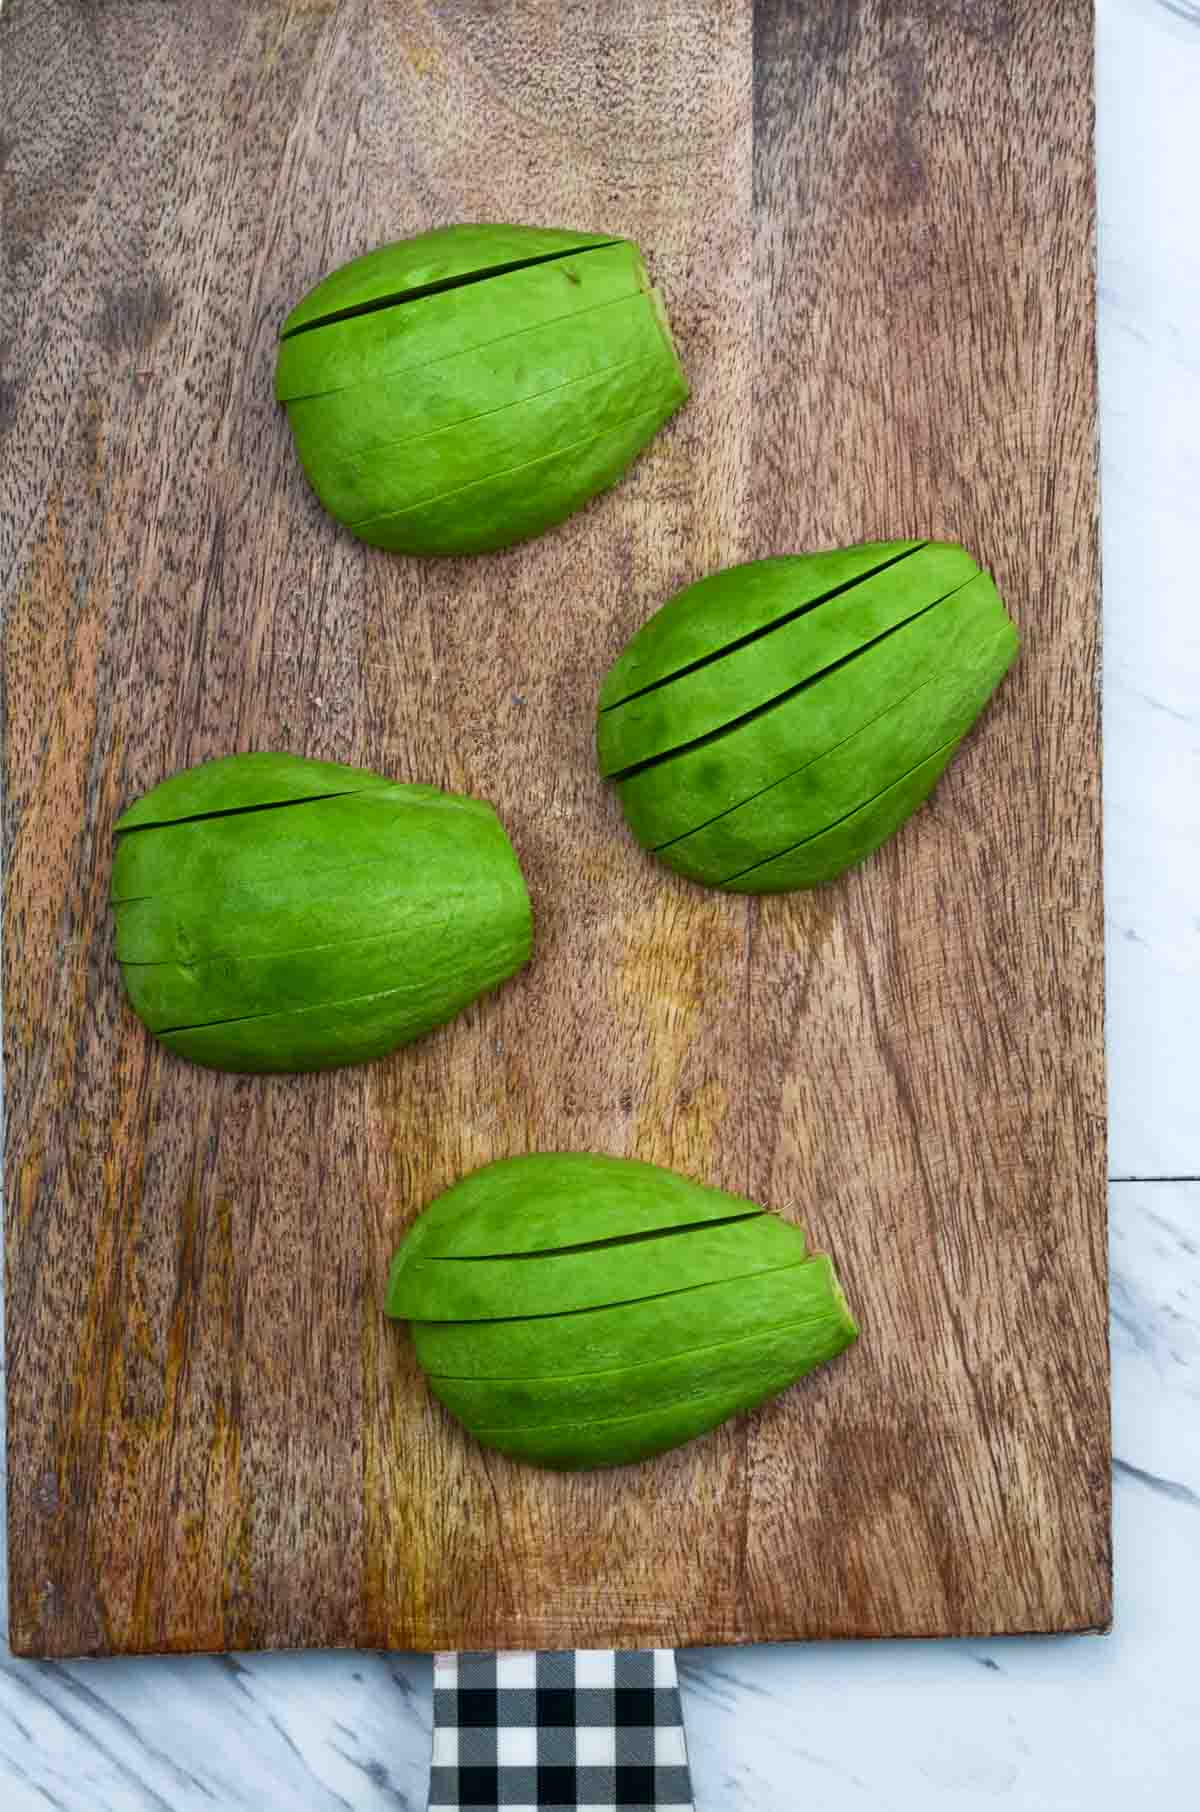 Peeled and cut avocados sliced on the wooden board.